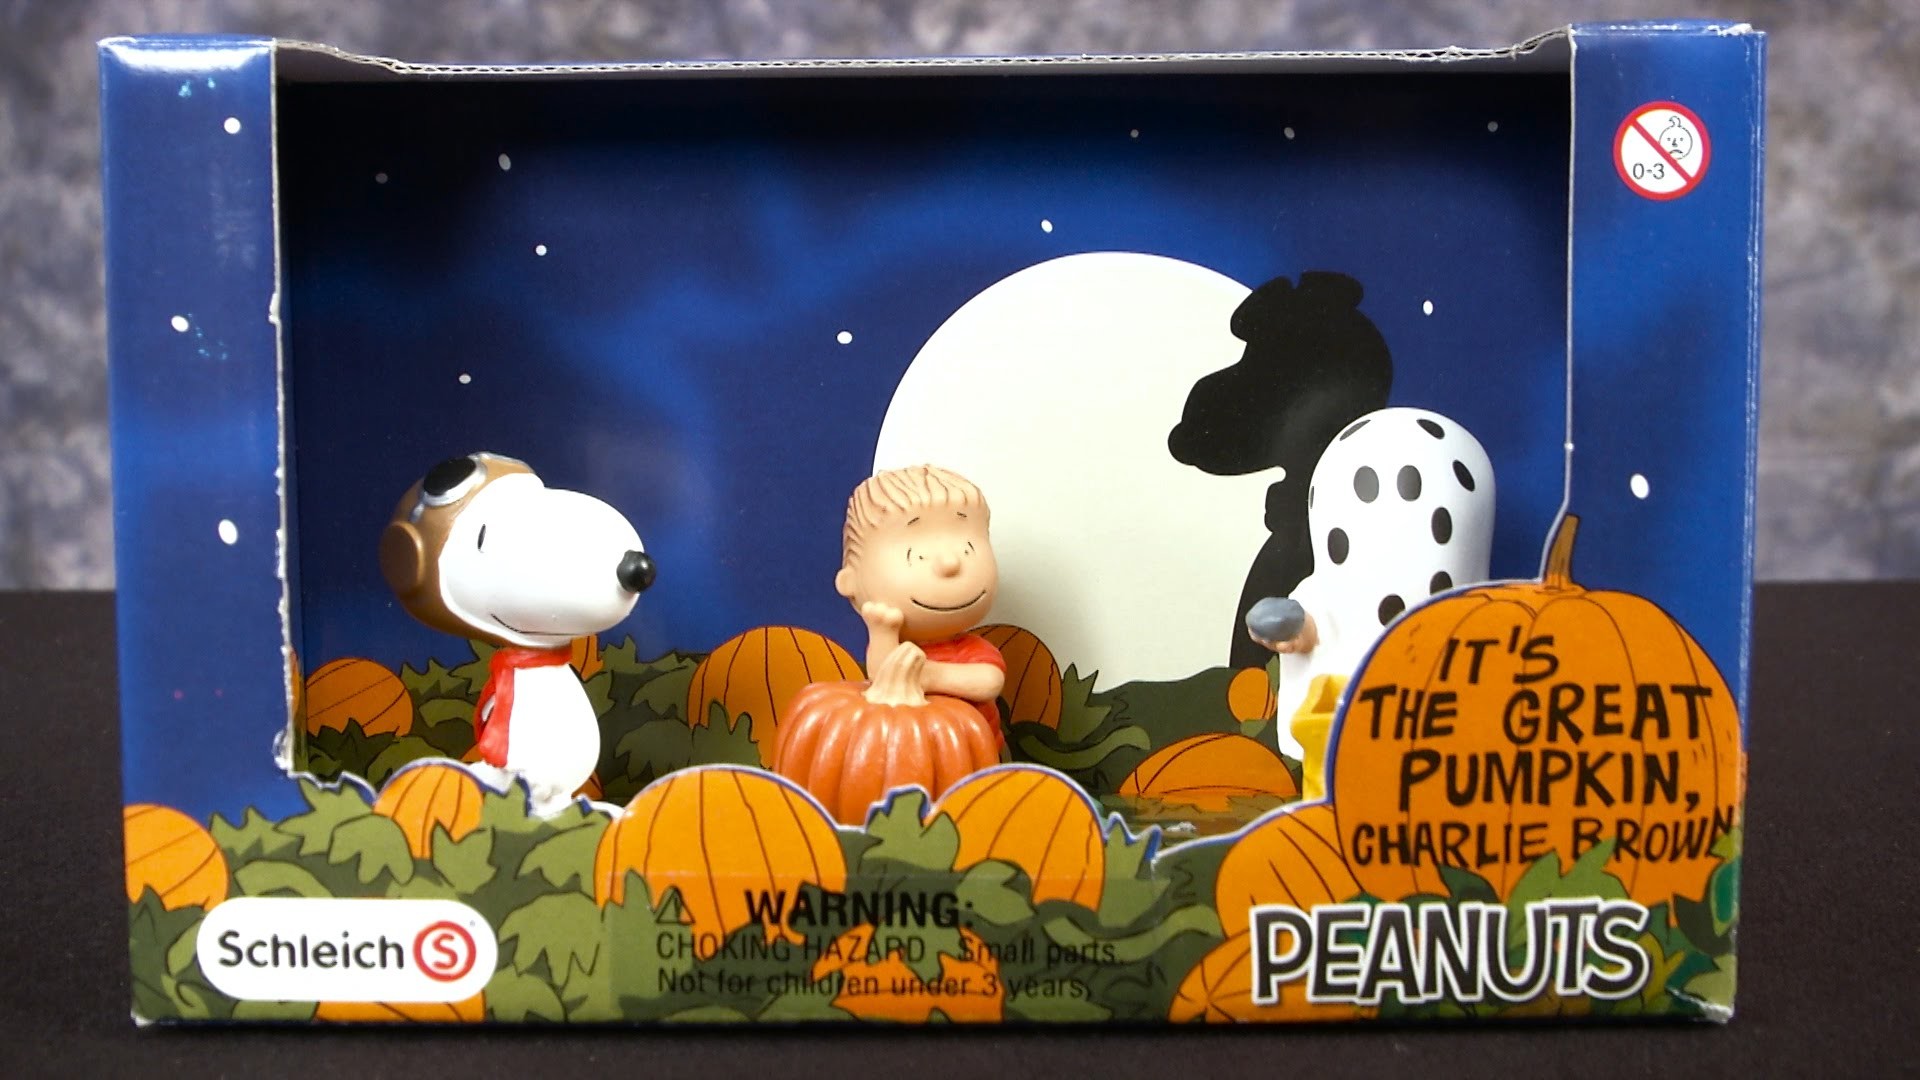 1920x1080 Peanuts It's The Great Pumpkin, Charlie Brown Figure Set from Schleich -  YouTube